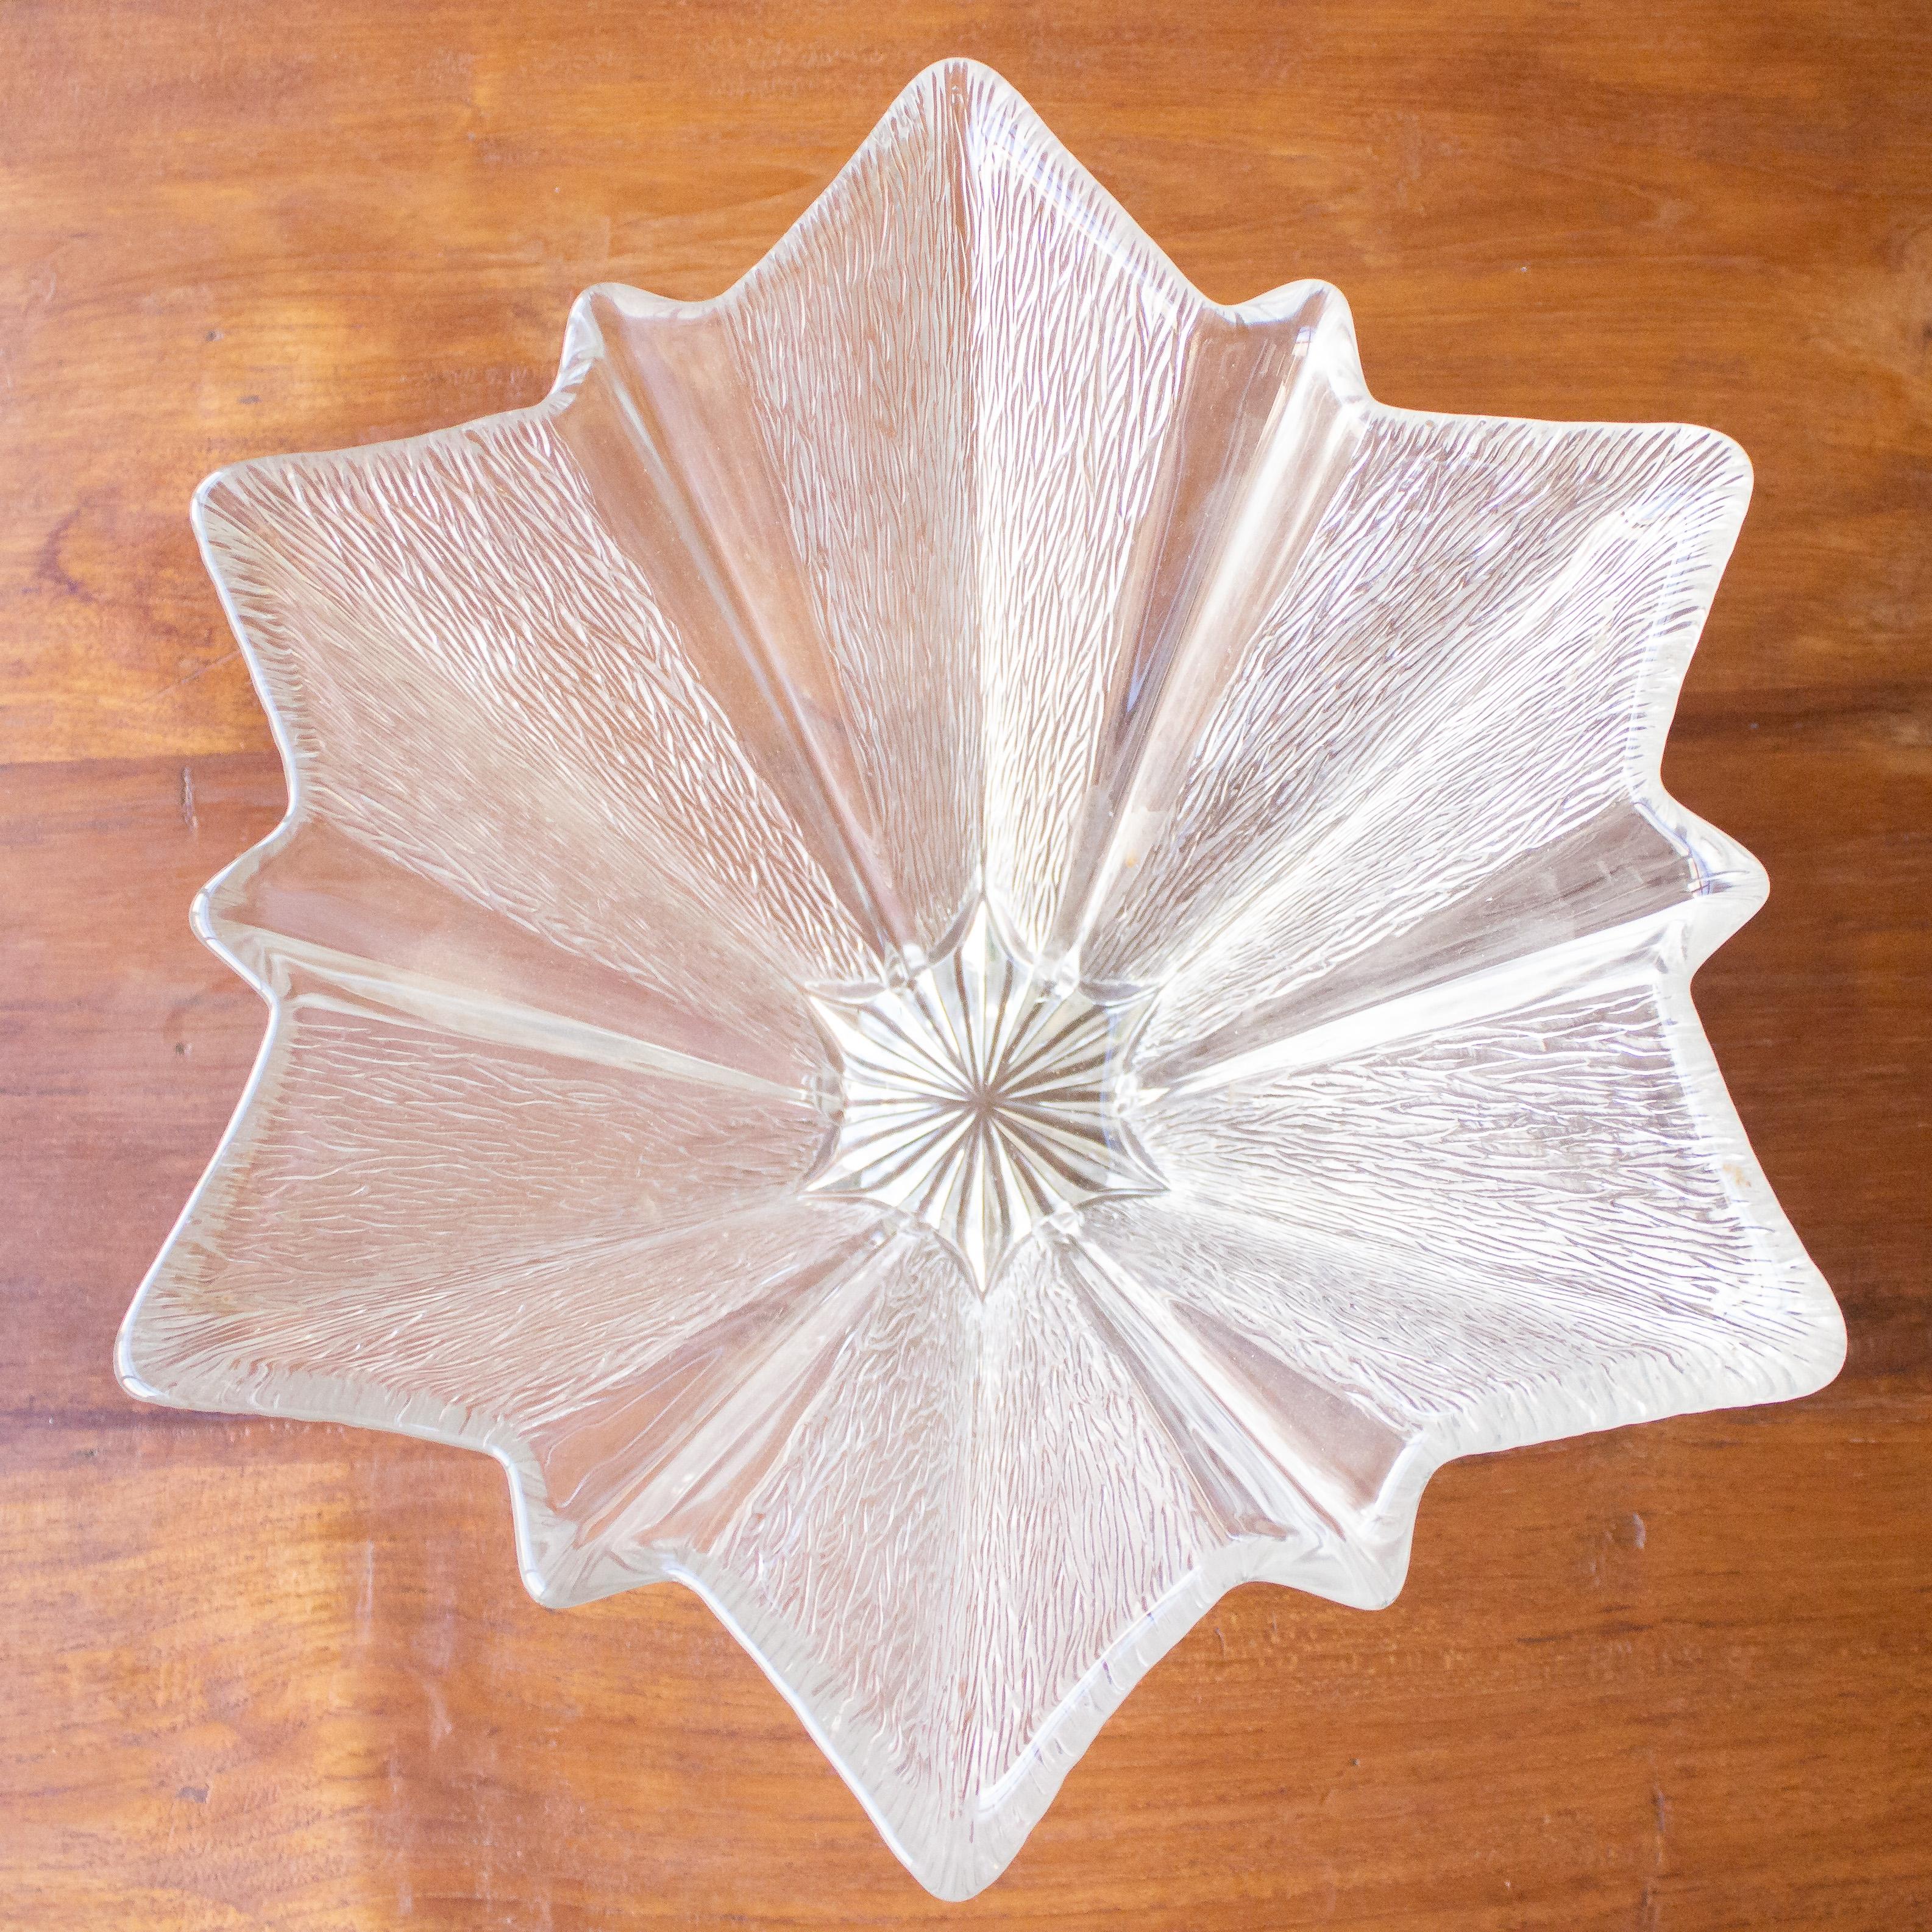 Mod clear glass centerpiece/bowl with starburst design. French, 1960s. Good vintage condition.

Ref #: H1218-02

Dimensions: 7